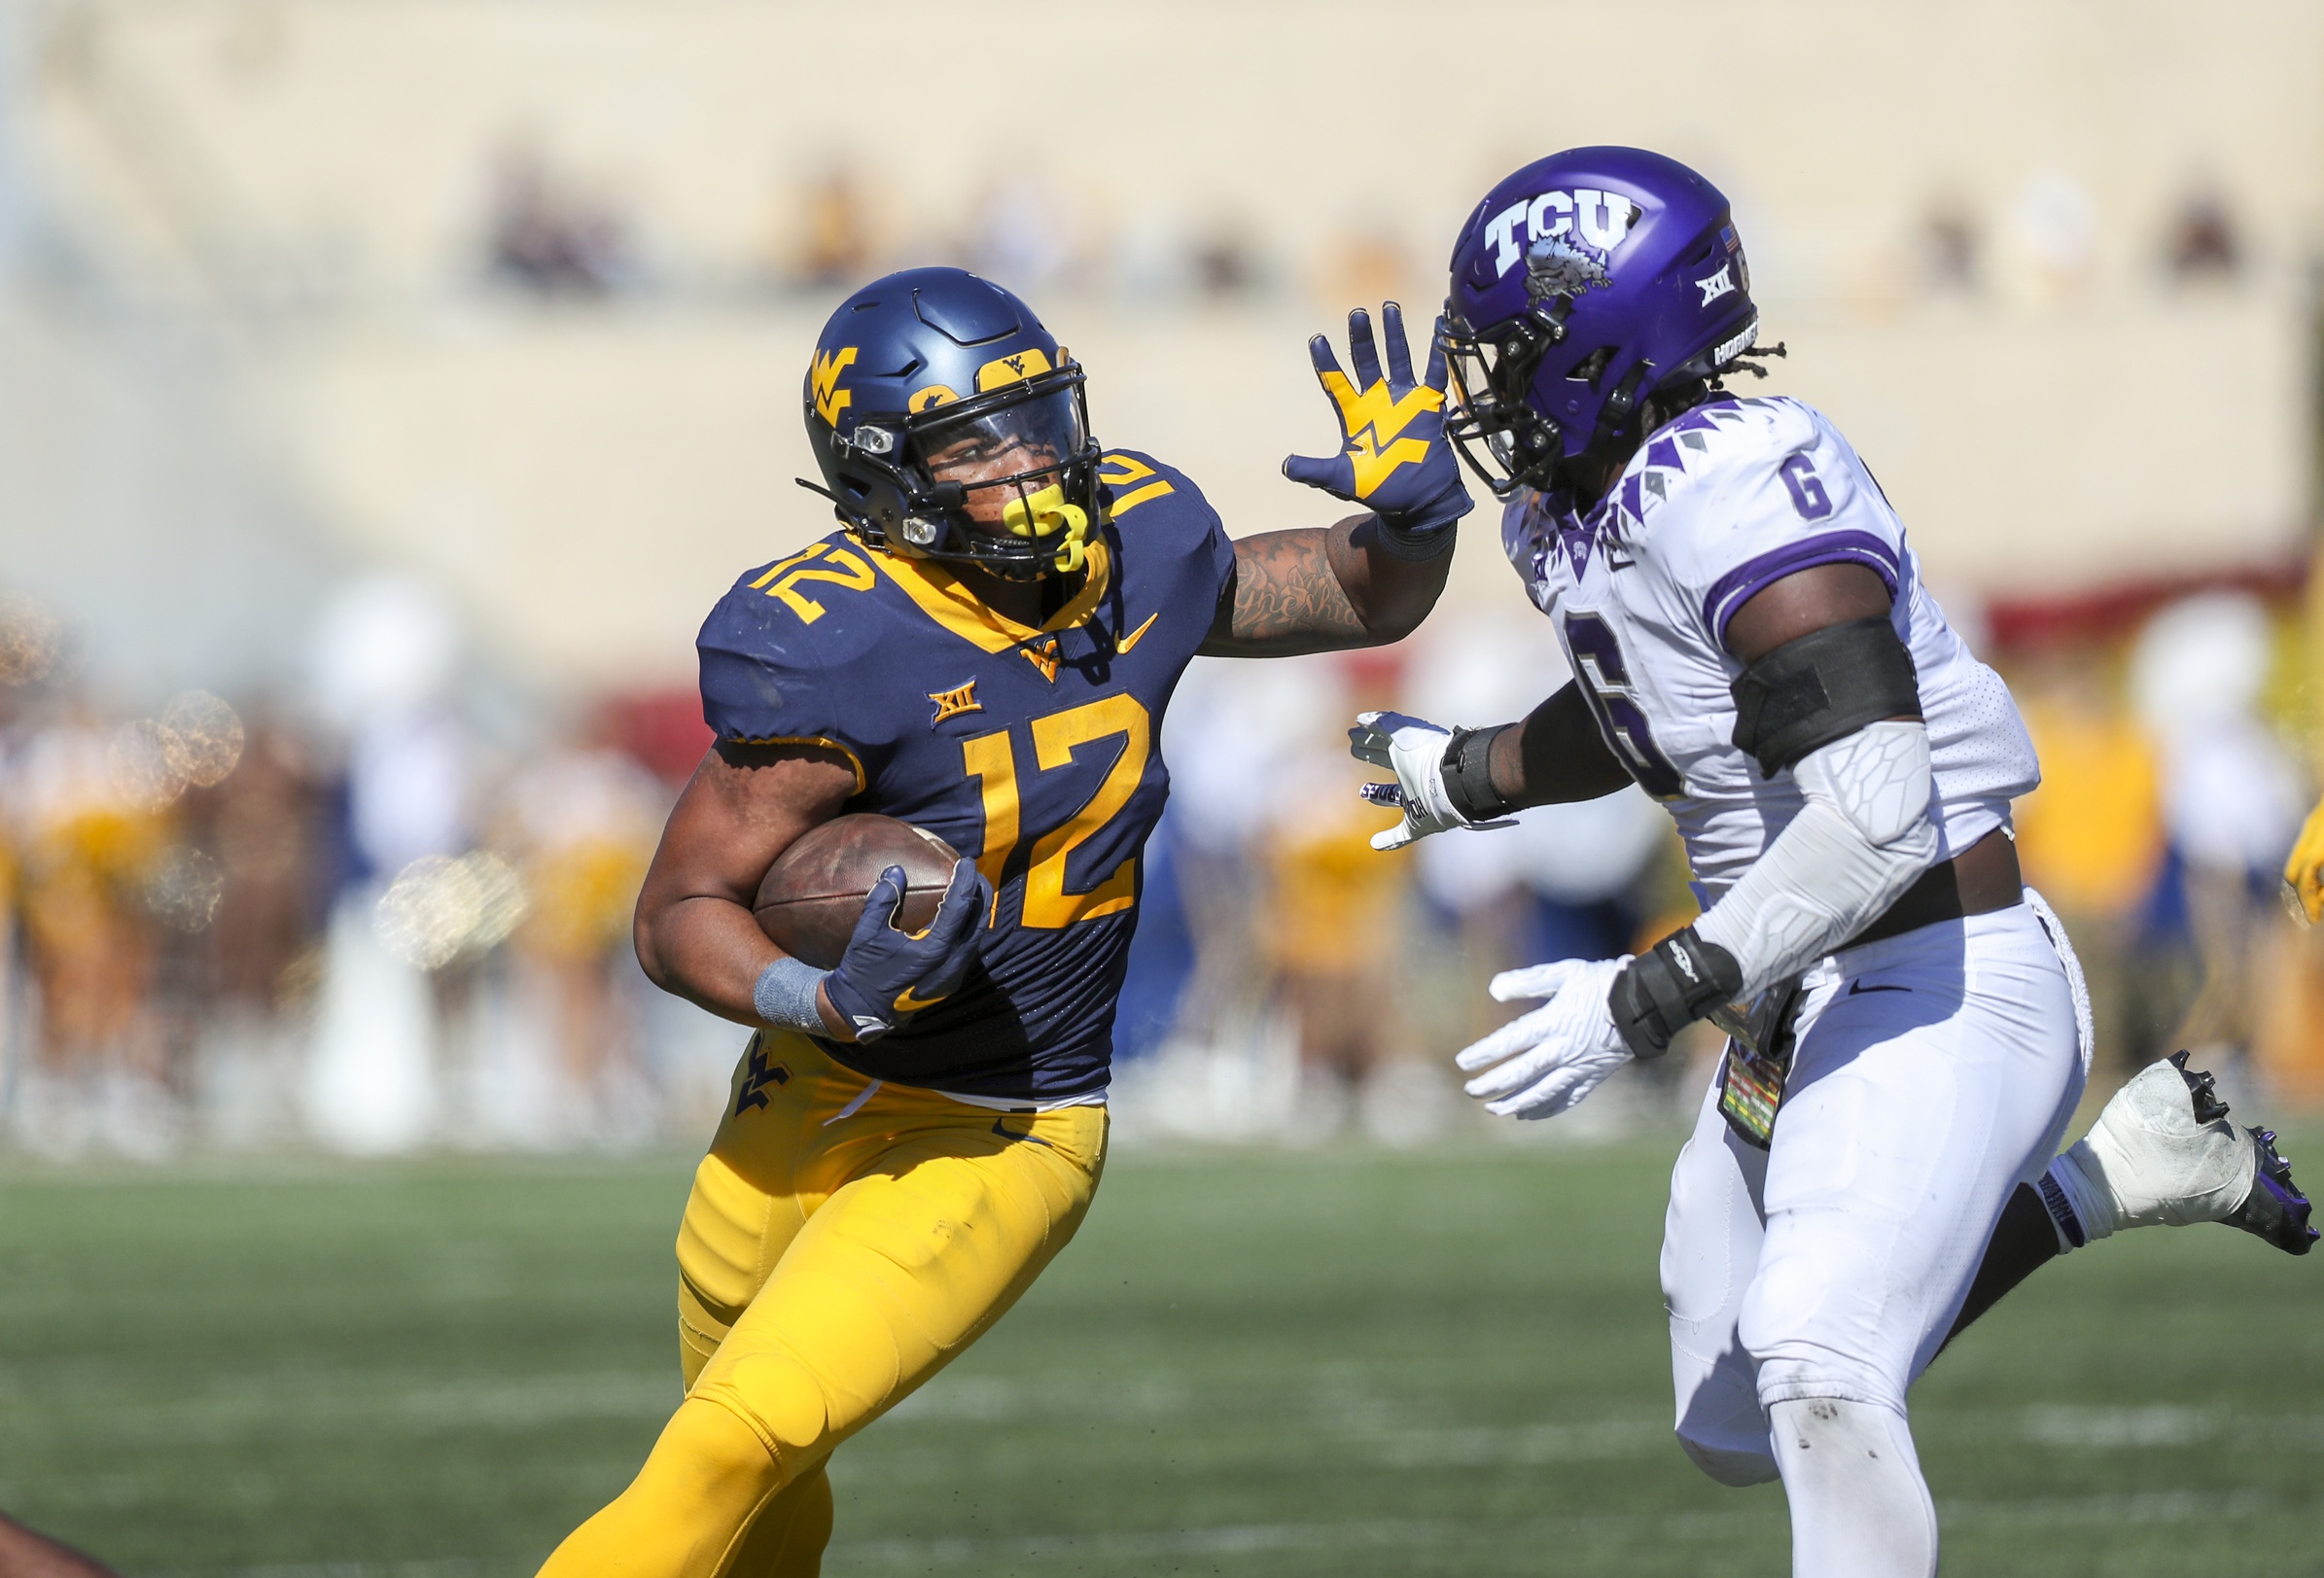 college football picks CJ Donaldson West Virginia Mountaineers predictions best bet odds